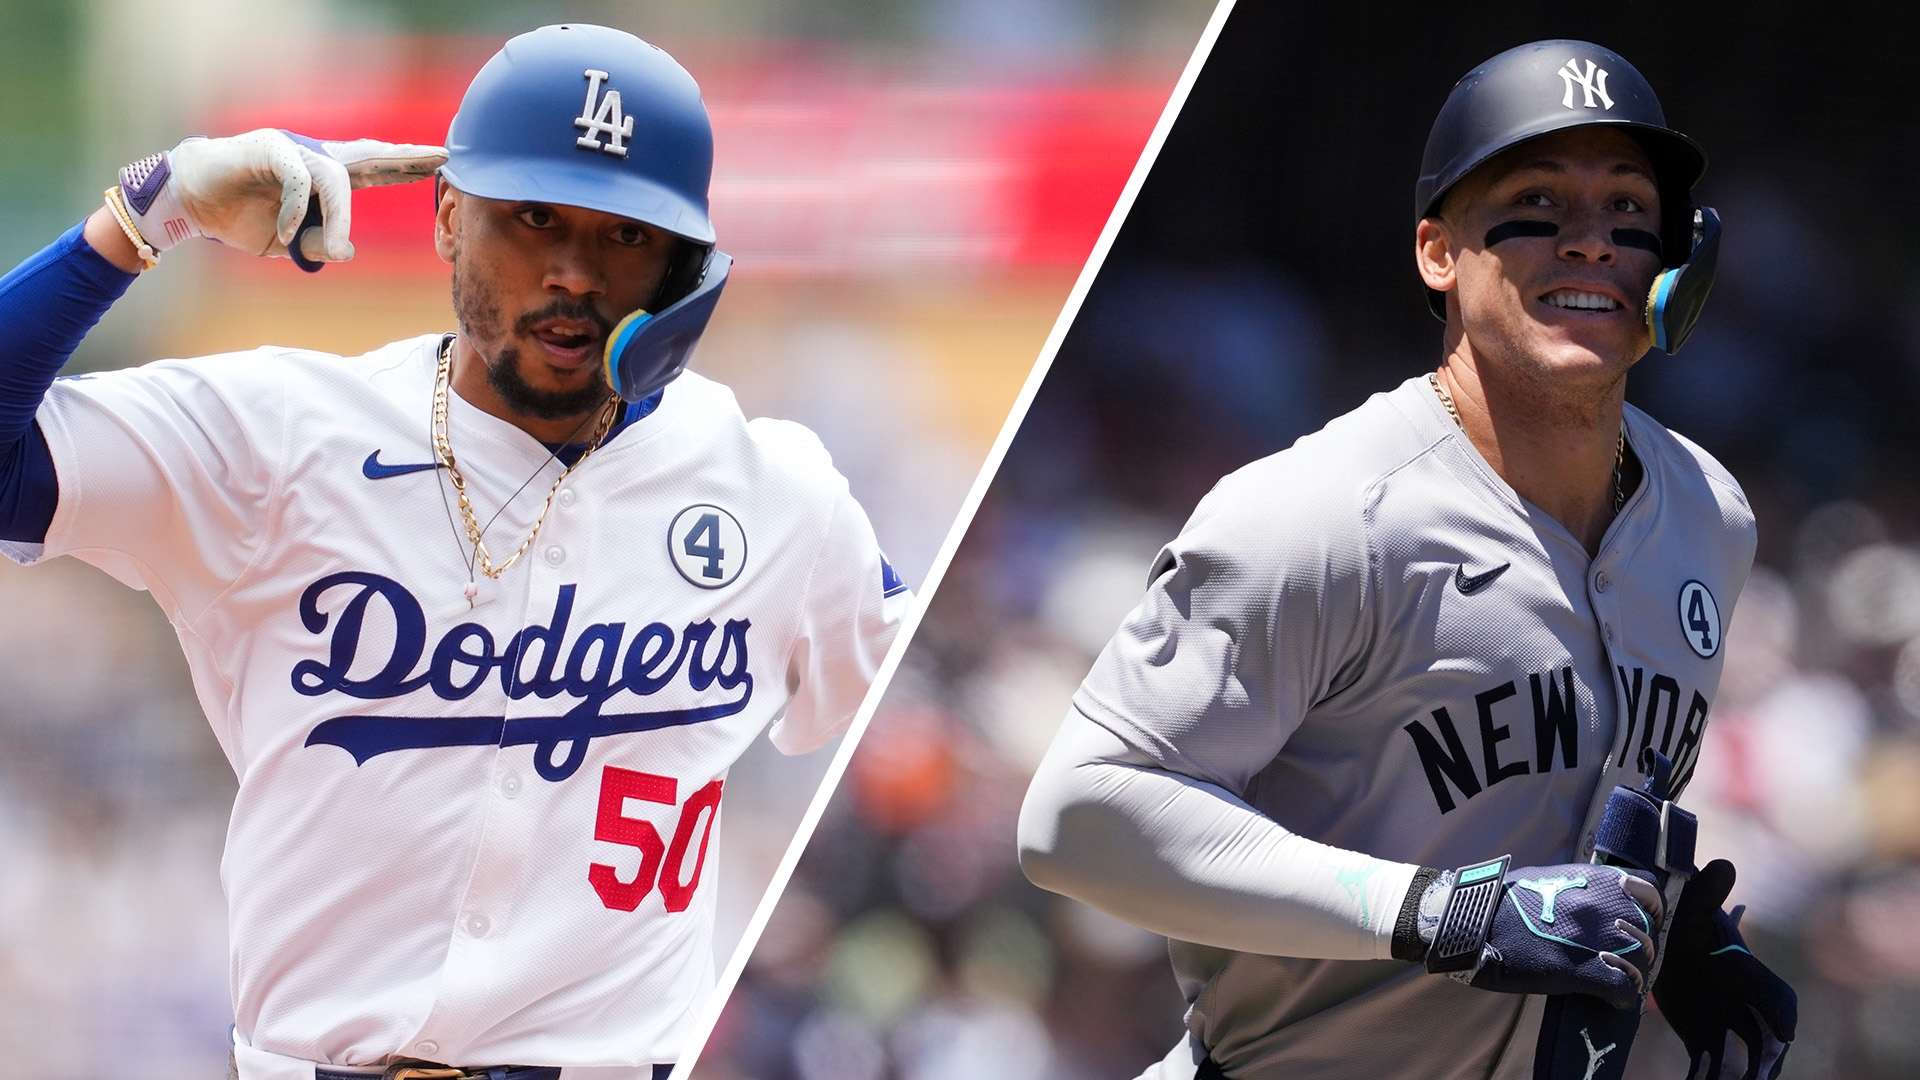 Who is under more pressure to win it all: Dodgers or Yankees?